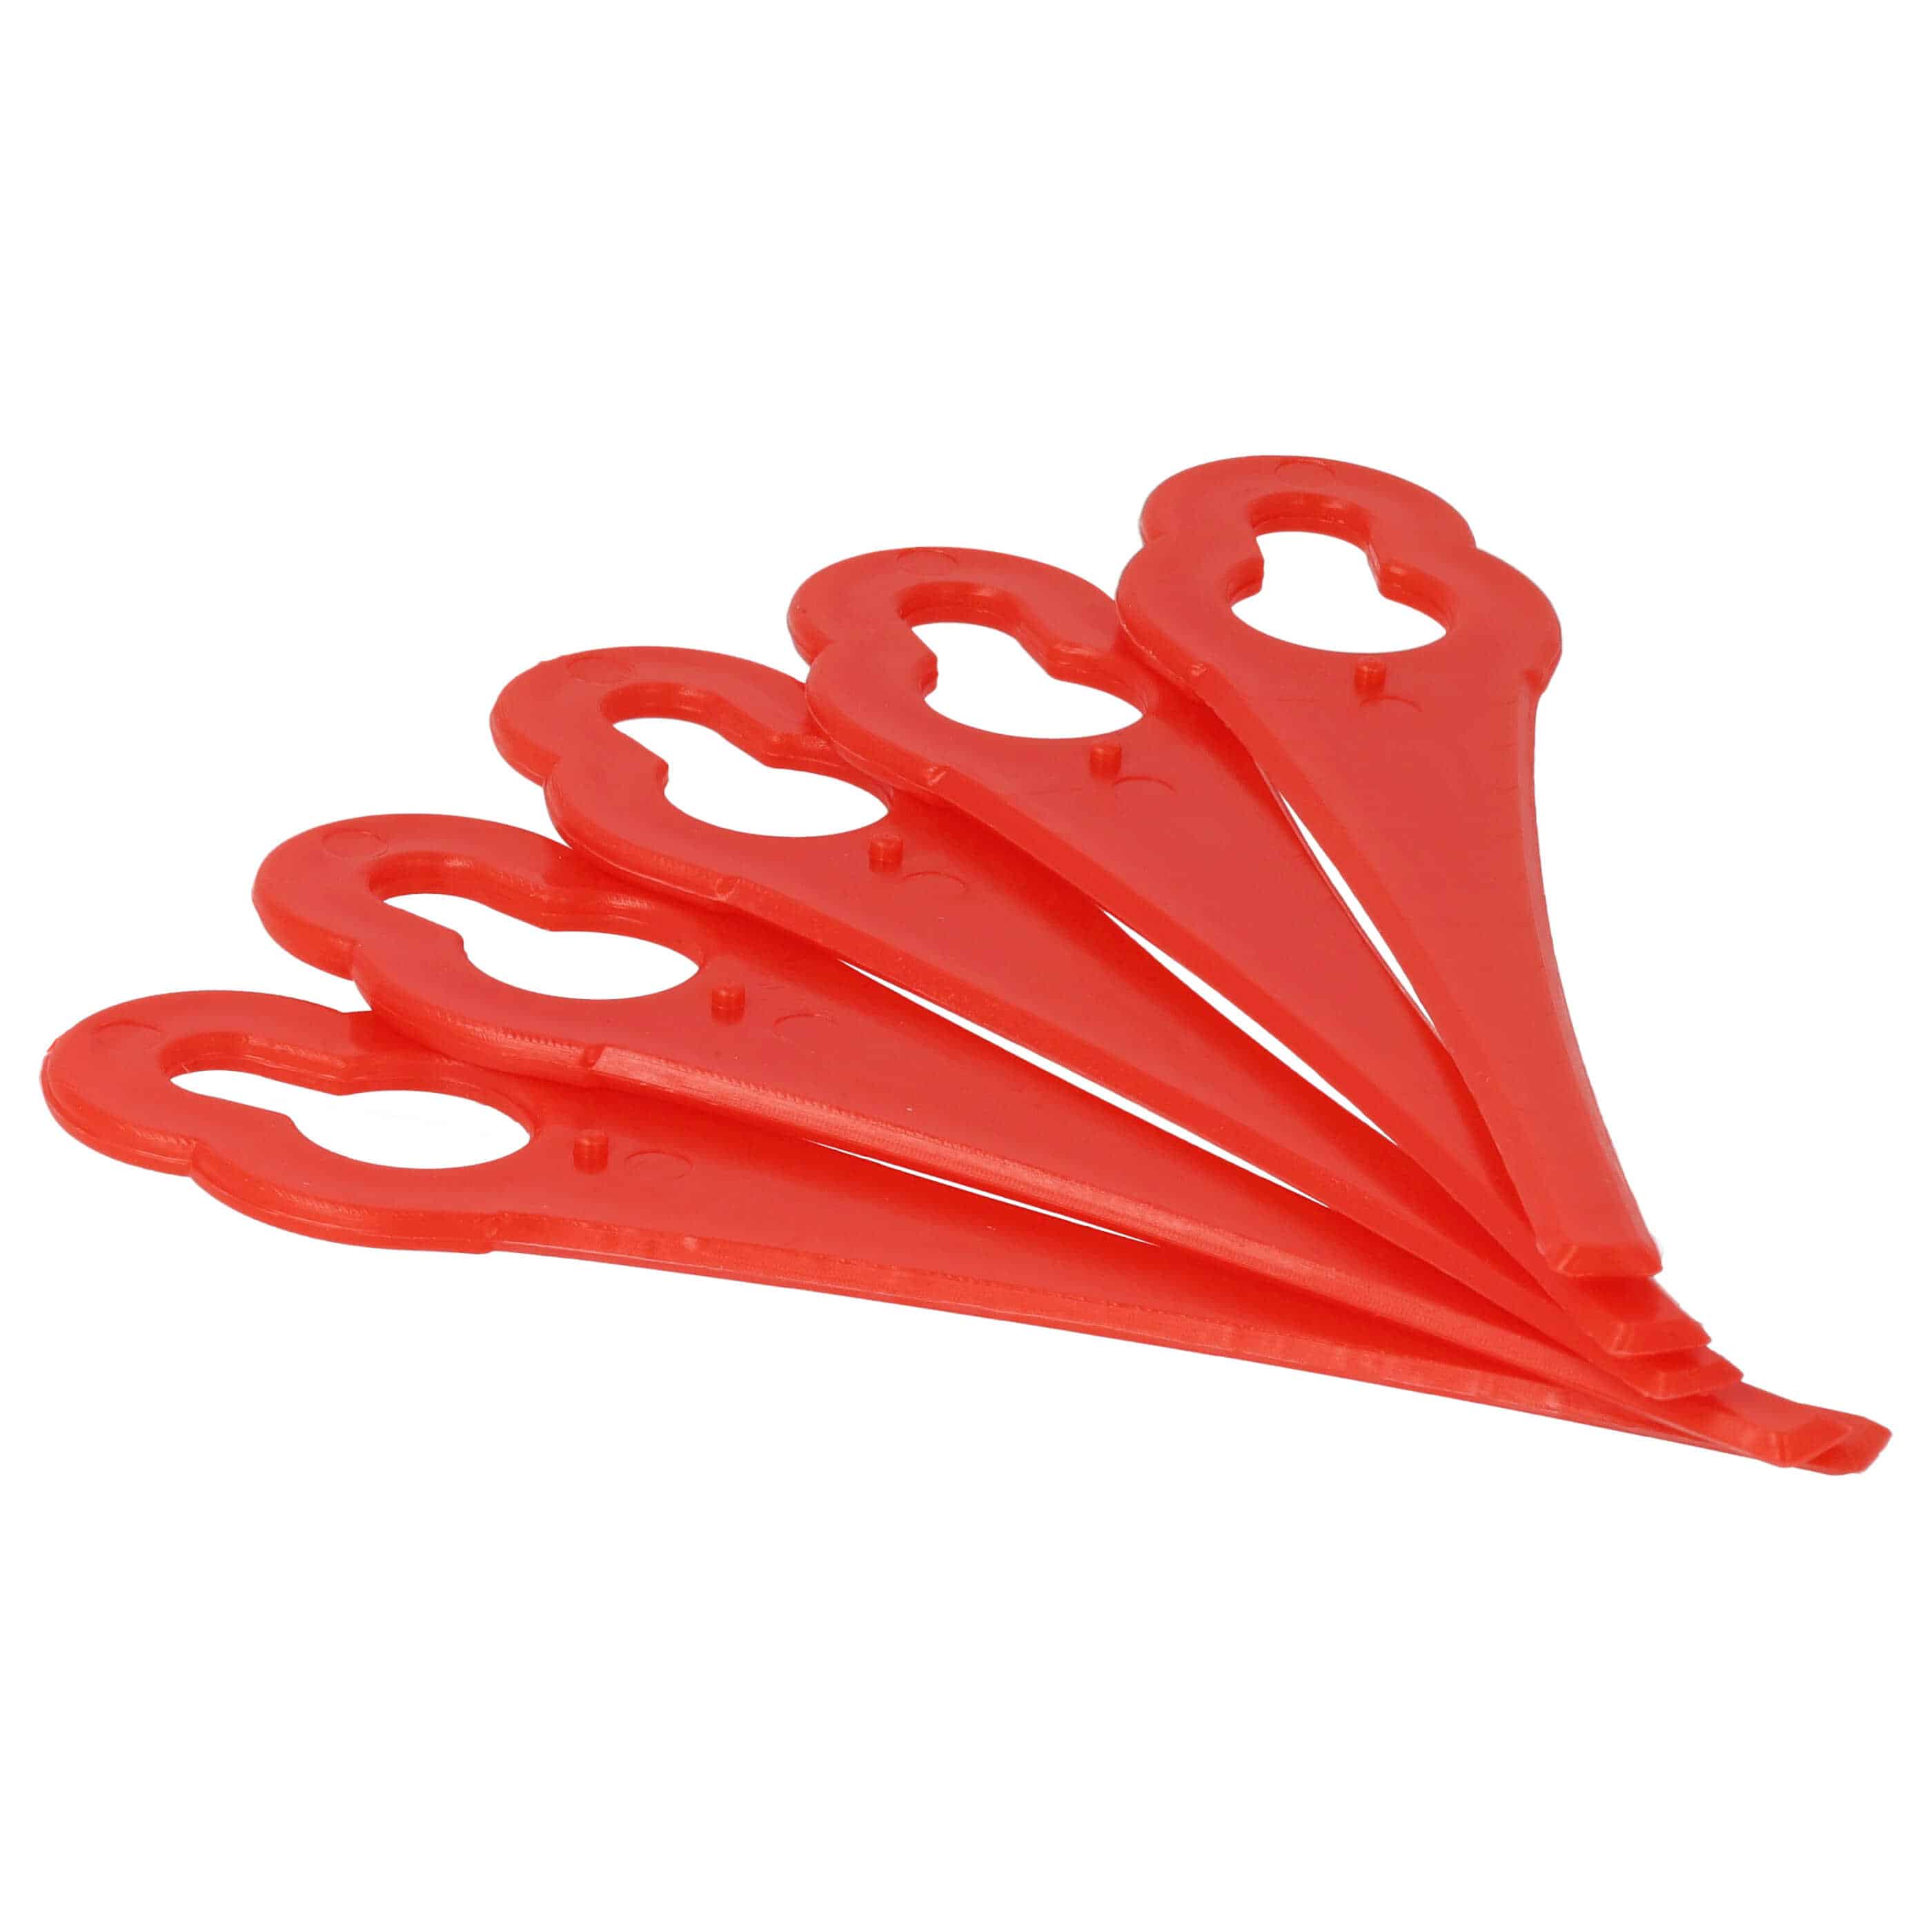 10x Exchange Blade replaces Grizzly 91094326 for Cordless Lawnmower etc. - polyamide, red